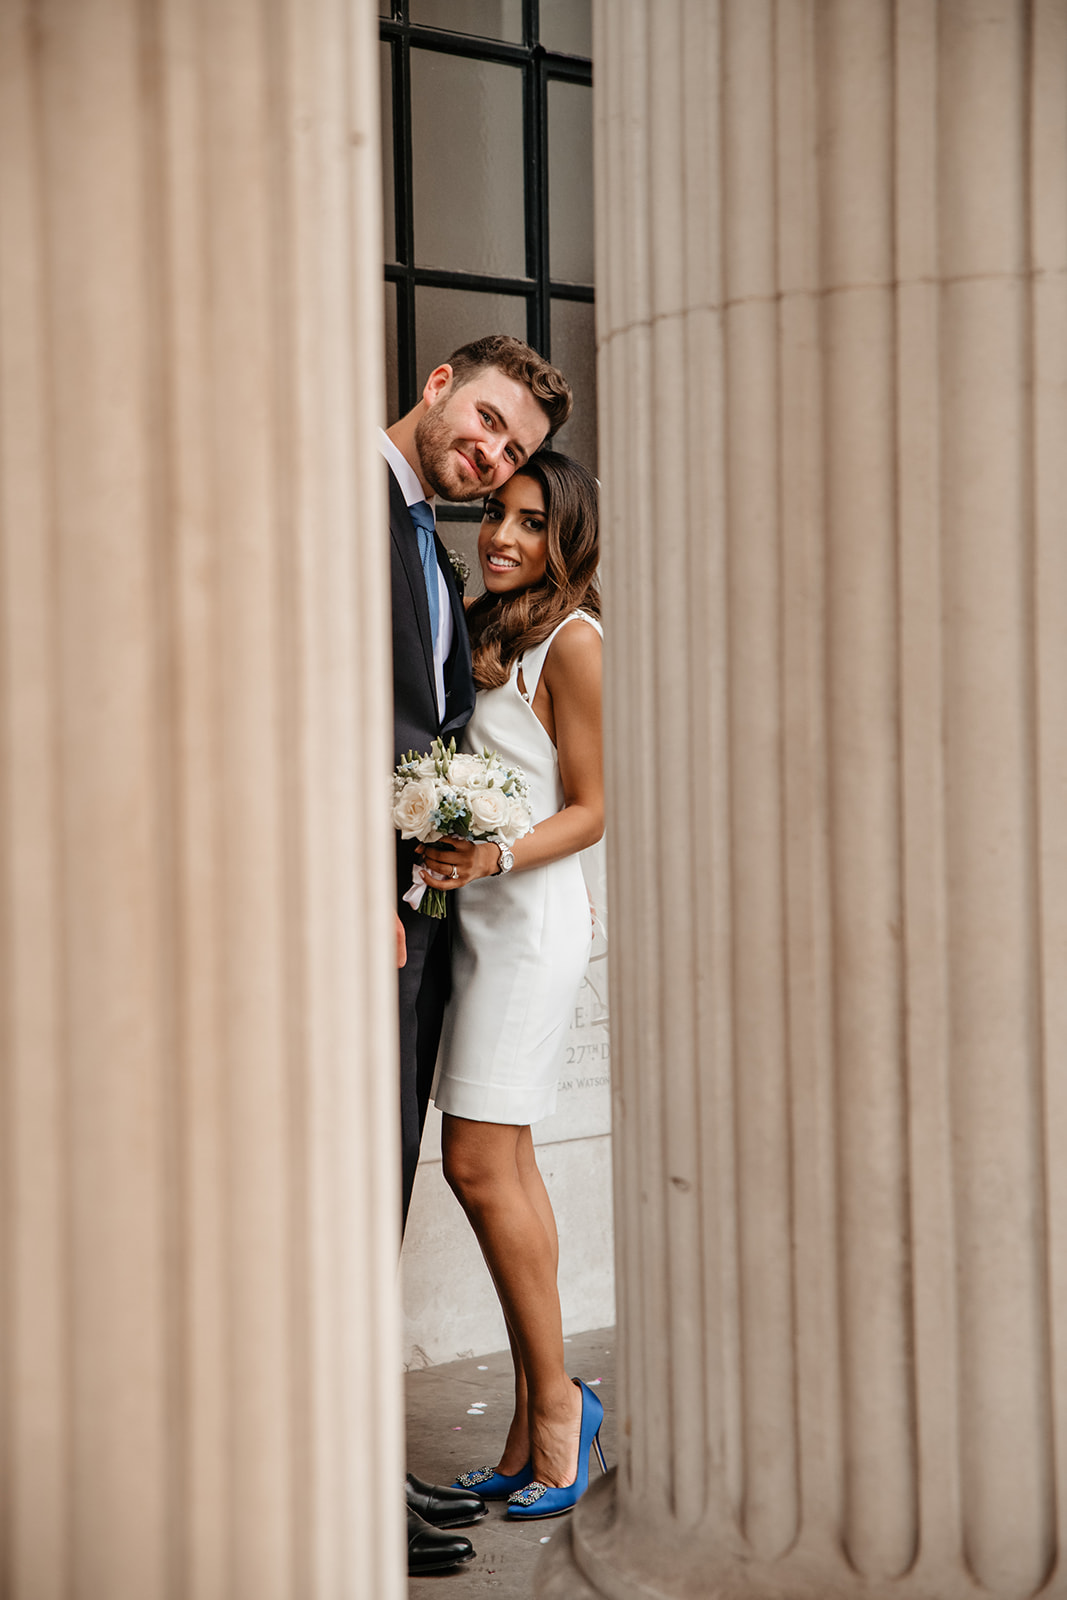 couples wedding portrait at Old Marylebone Town Hall in London